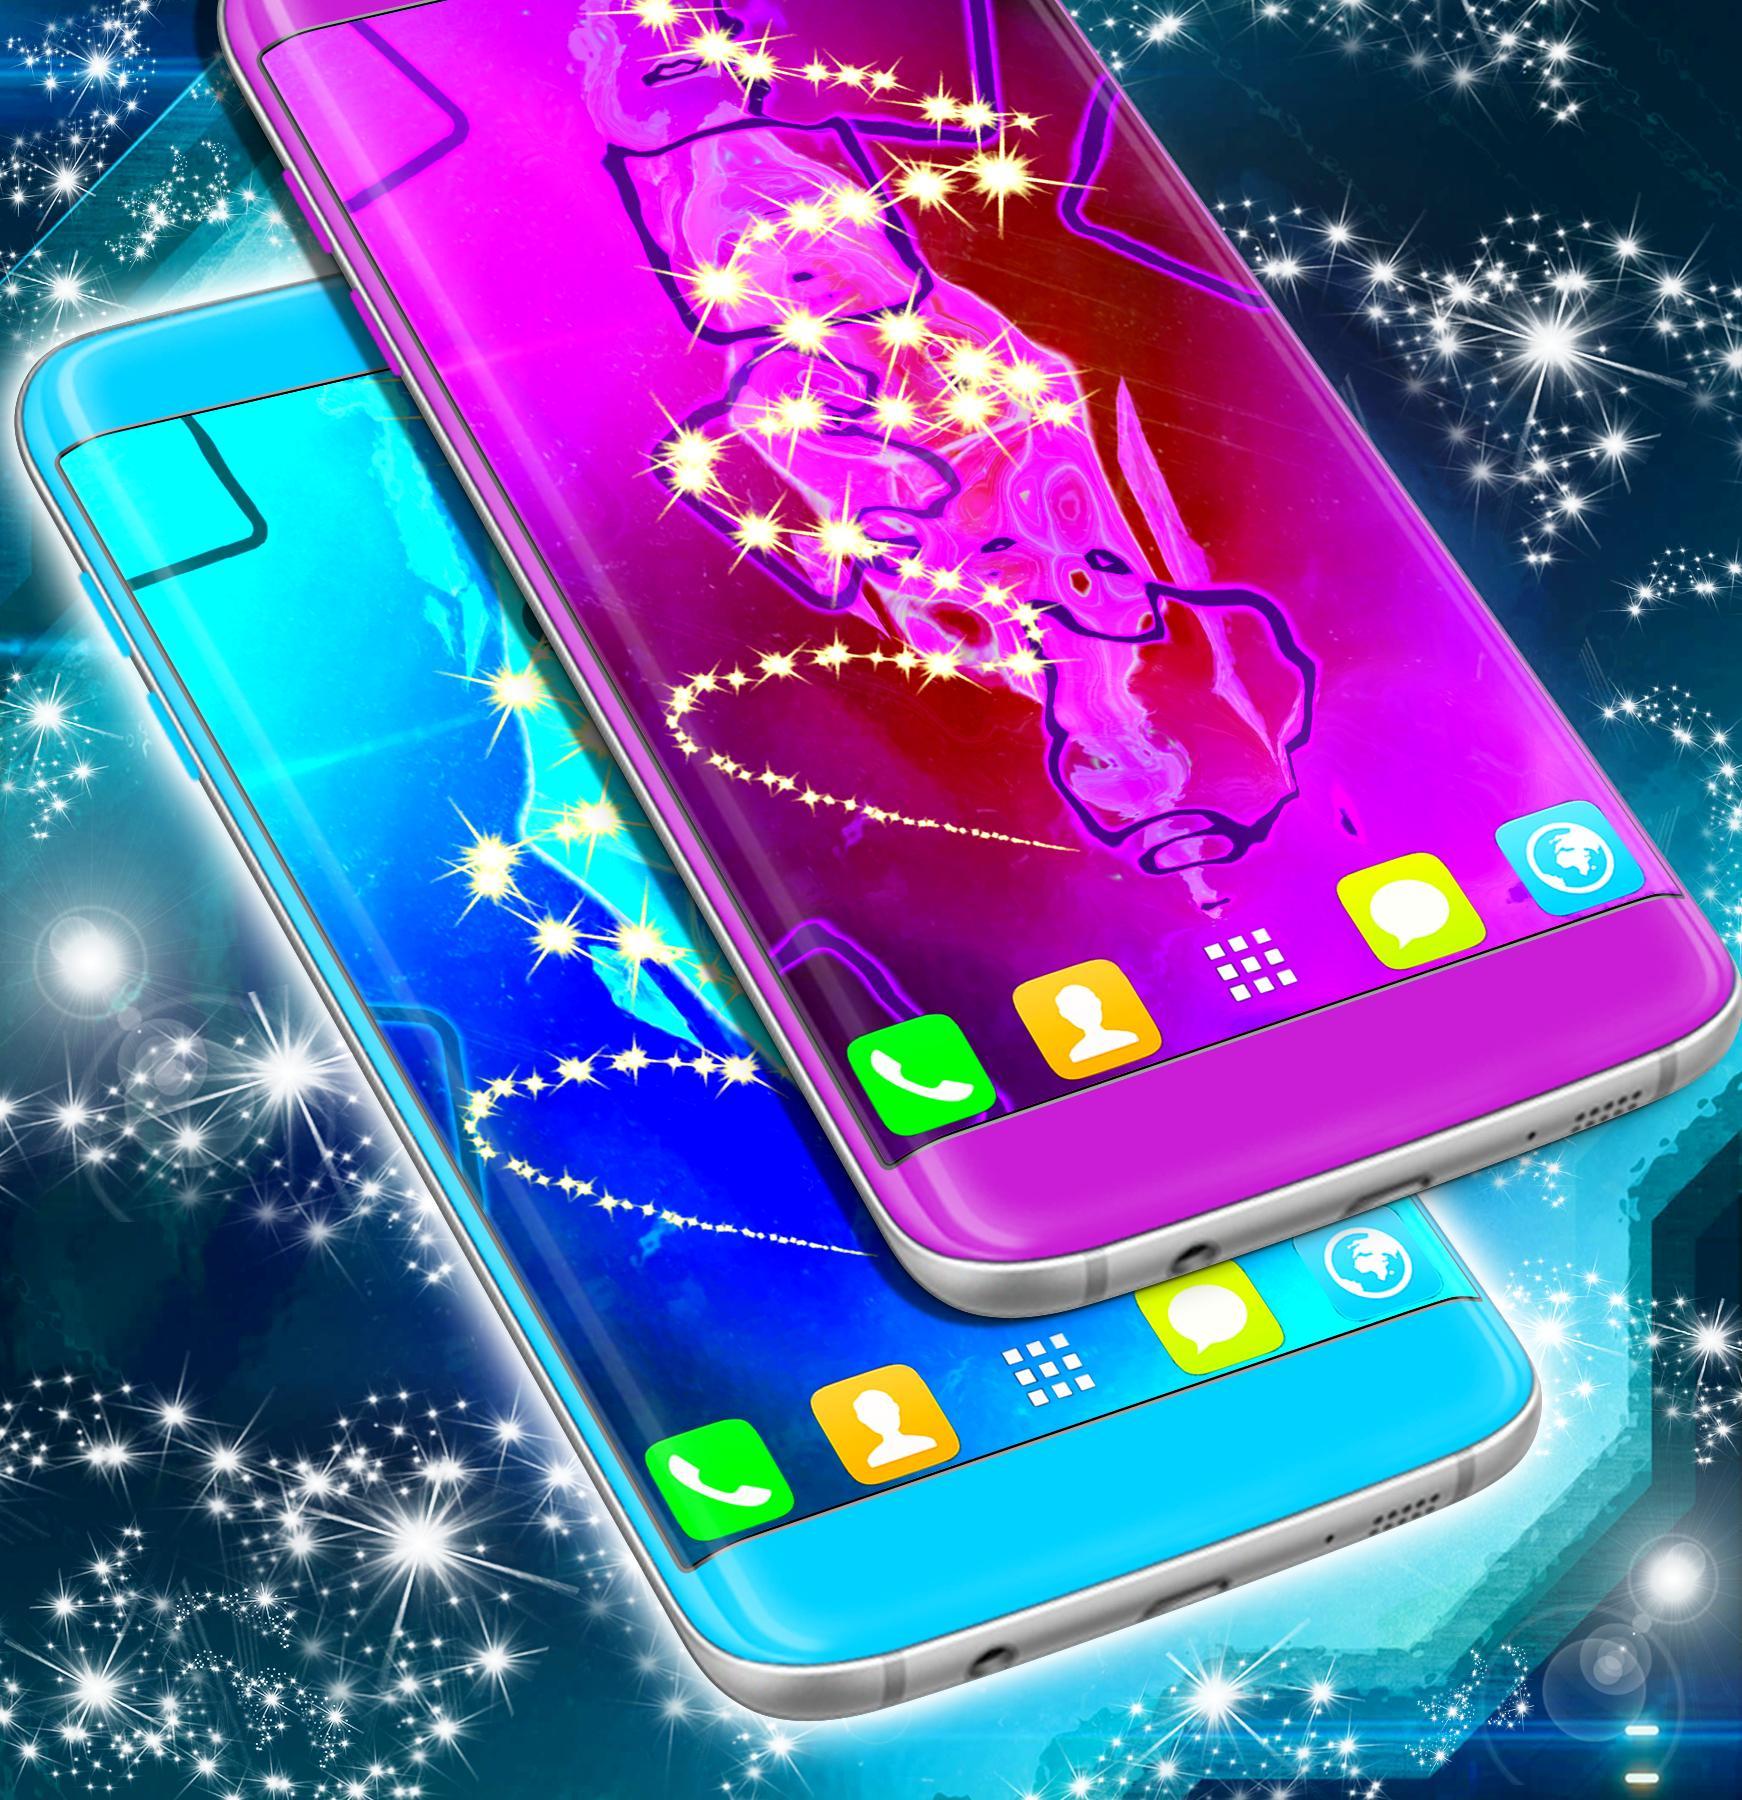 Live Wallpaper For Samsung Galaxy J7 Prime For Android Apk Download